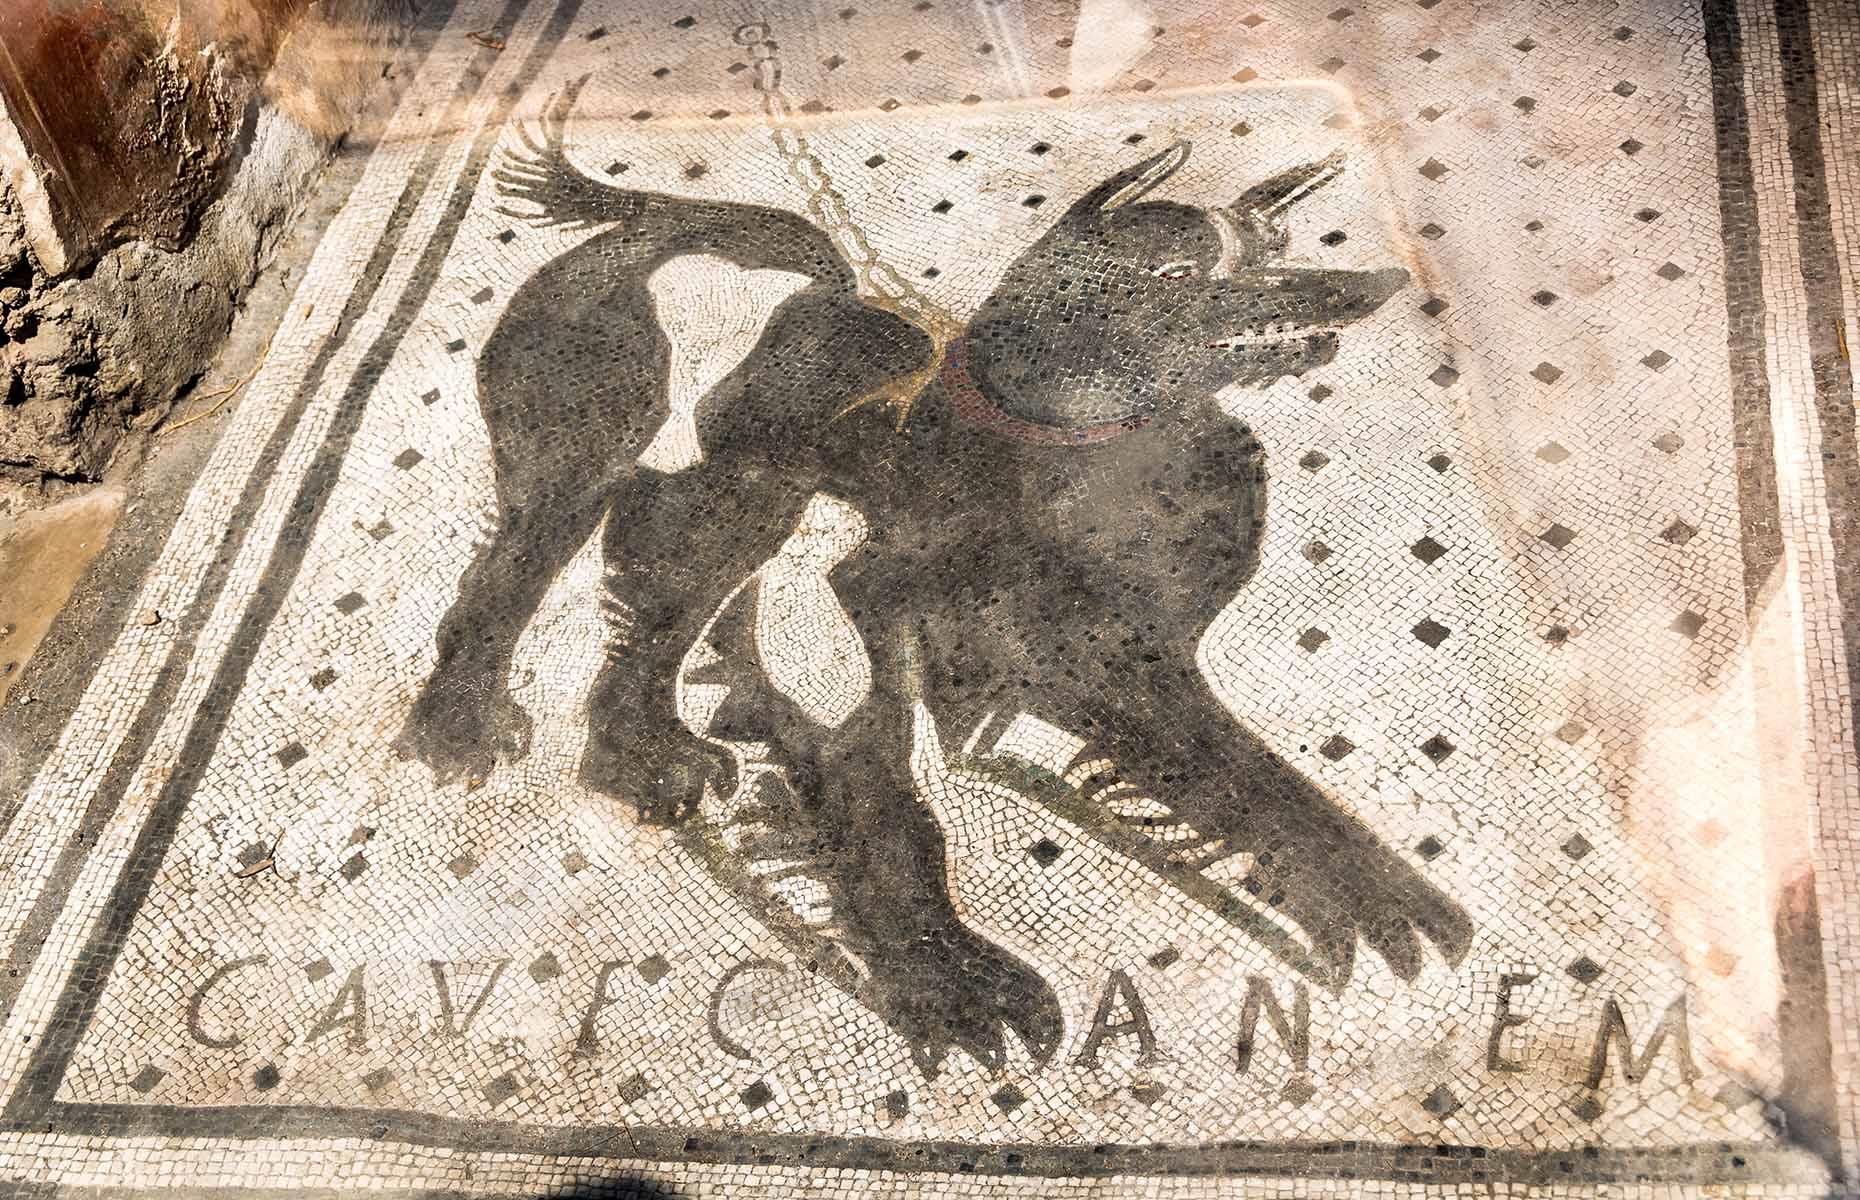 <p>One of the strangest things about exploring Pompeii is how many parallels there are between behaviour then and now, proving how little has changed in nearly 2,000 years. At the entrance to the House of the Tragic Poet, a mosaic sign reads ‘cave canem’, or ‘beware of the dog’, which appears in several spots around Pompeii.</p>  <p>Many walls were also etched with graffiti boasting of sexual conquests, appealing for the return of stolen goods or the rather more mundane: ‘On 19 April, I made bread’, says one, like a precursor to modern-day social media posts about sourdough…</p>